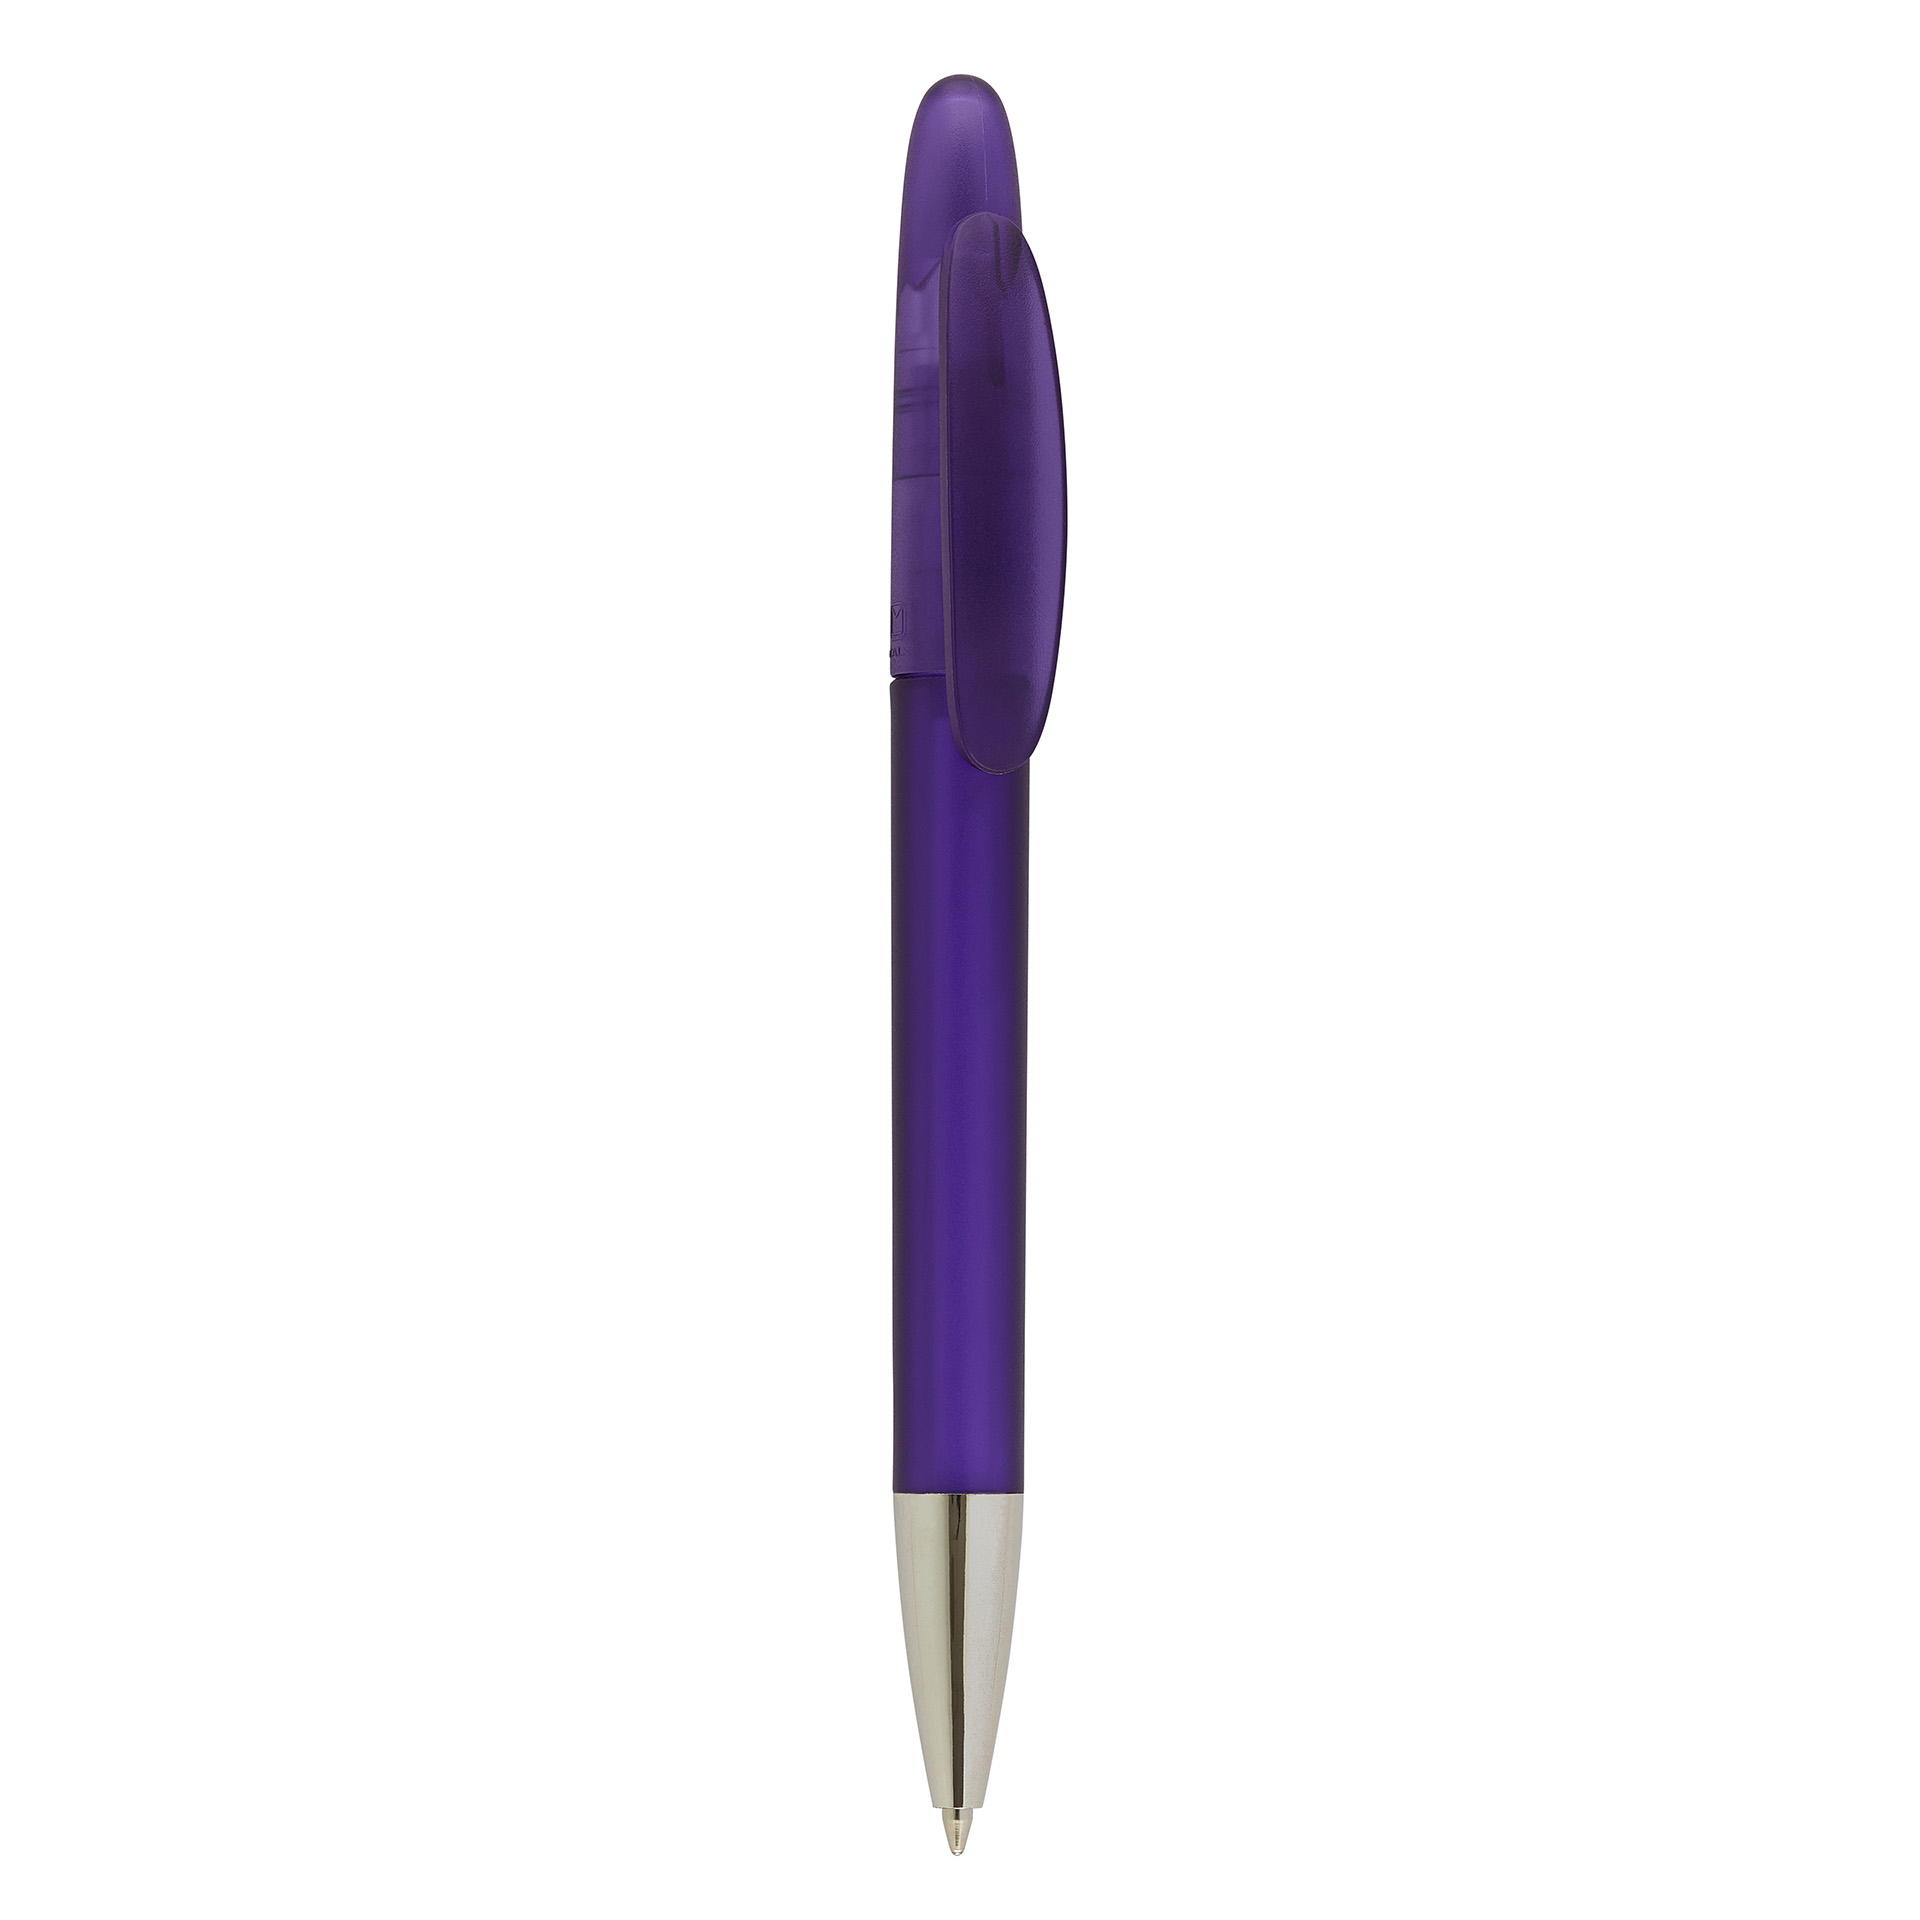 Hudson Biodegradable Frosted Pen  in purple